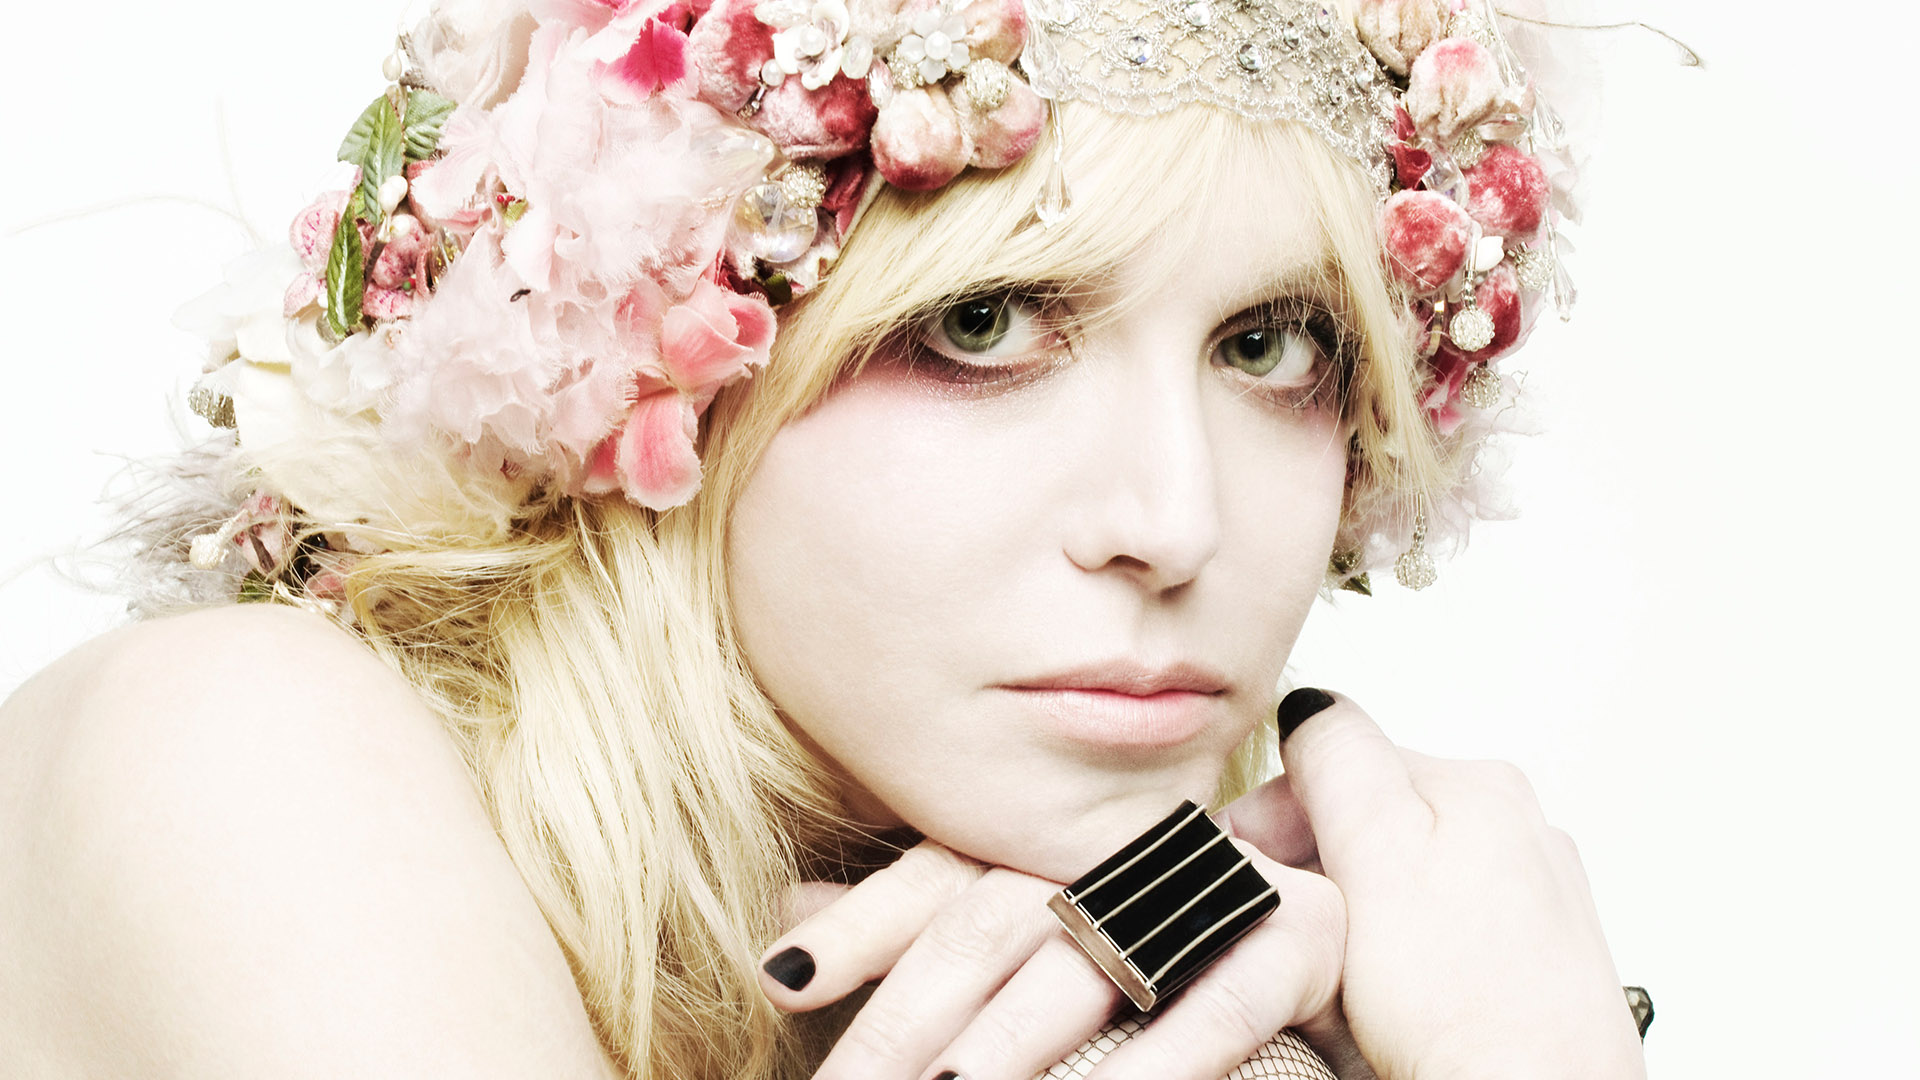 Courtney Love Wallpapers